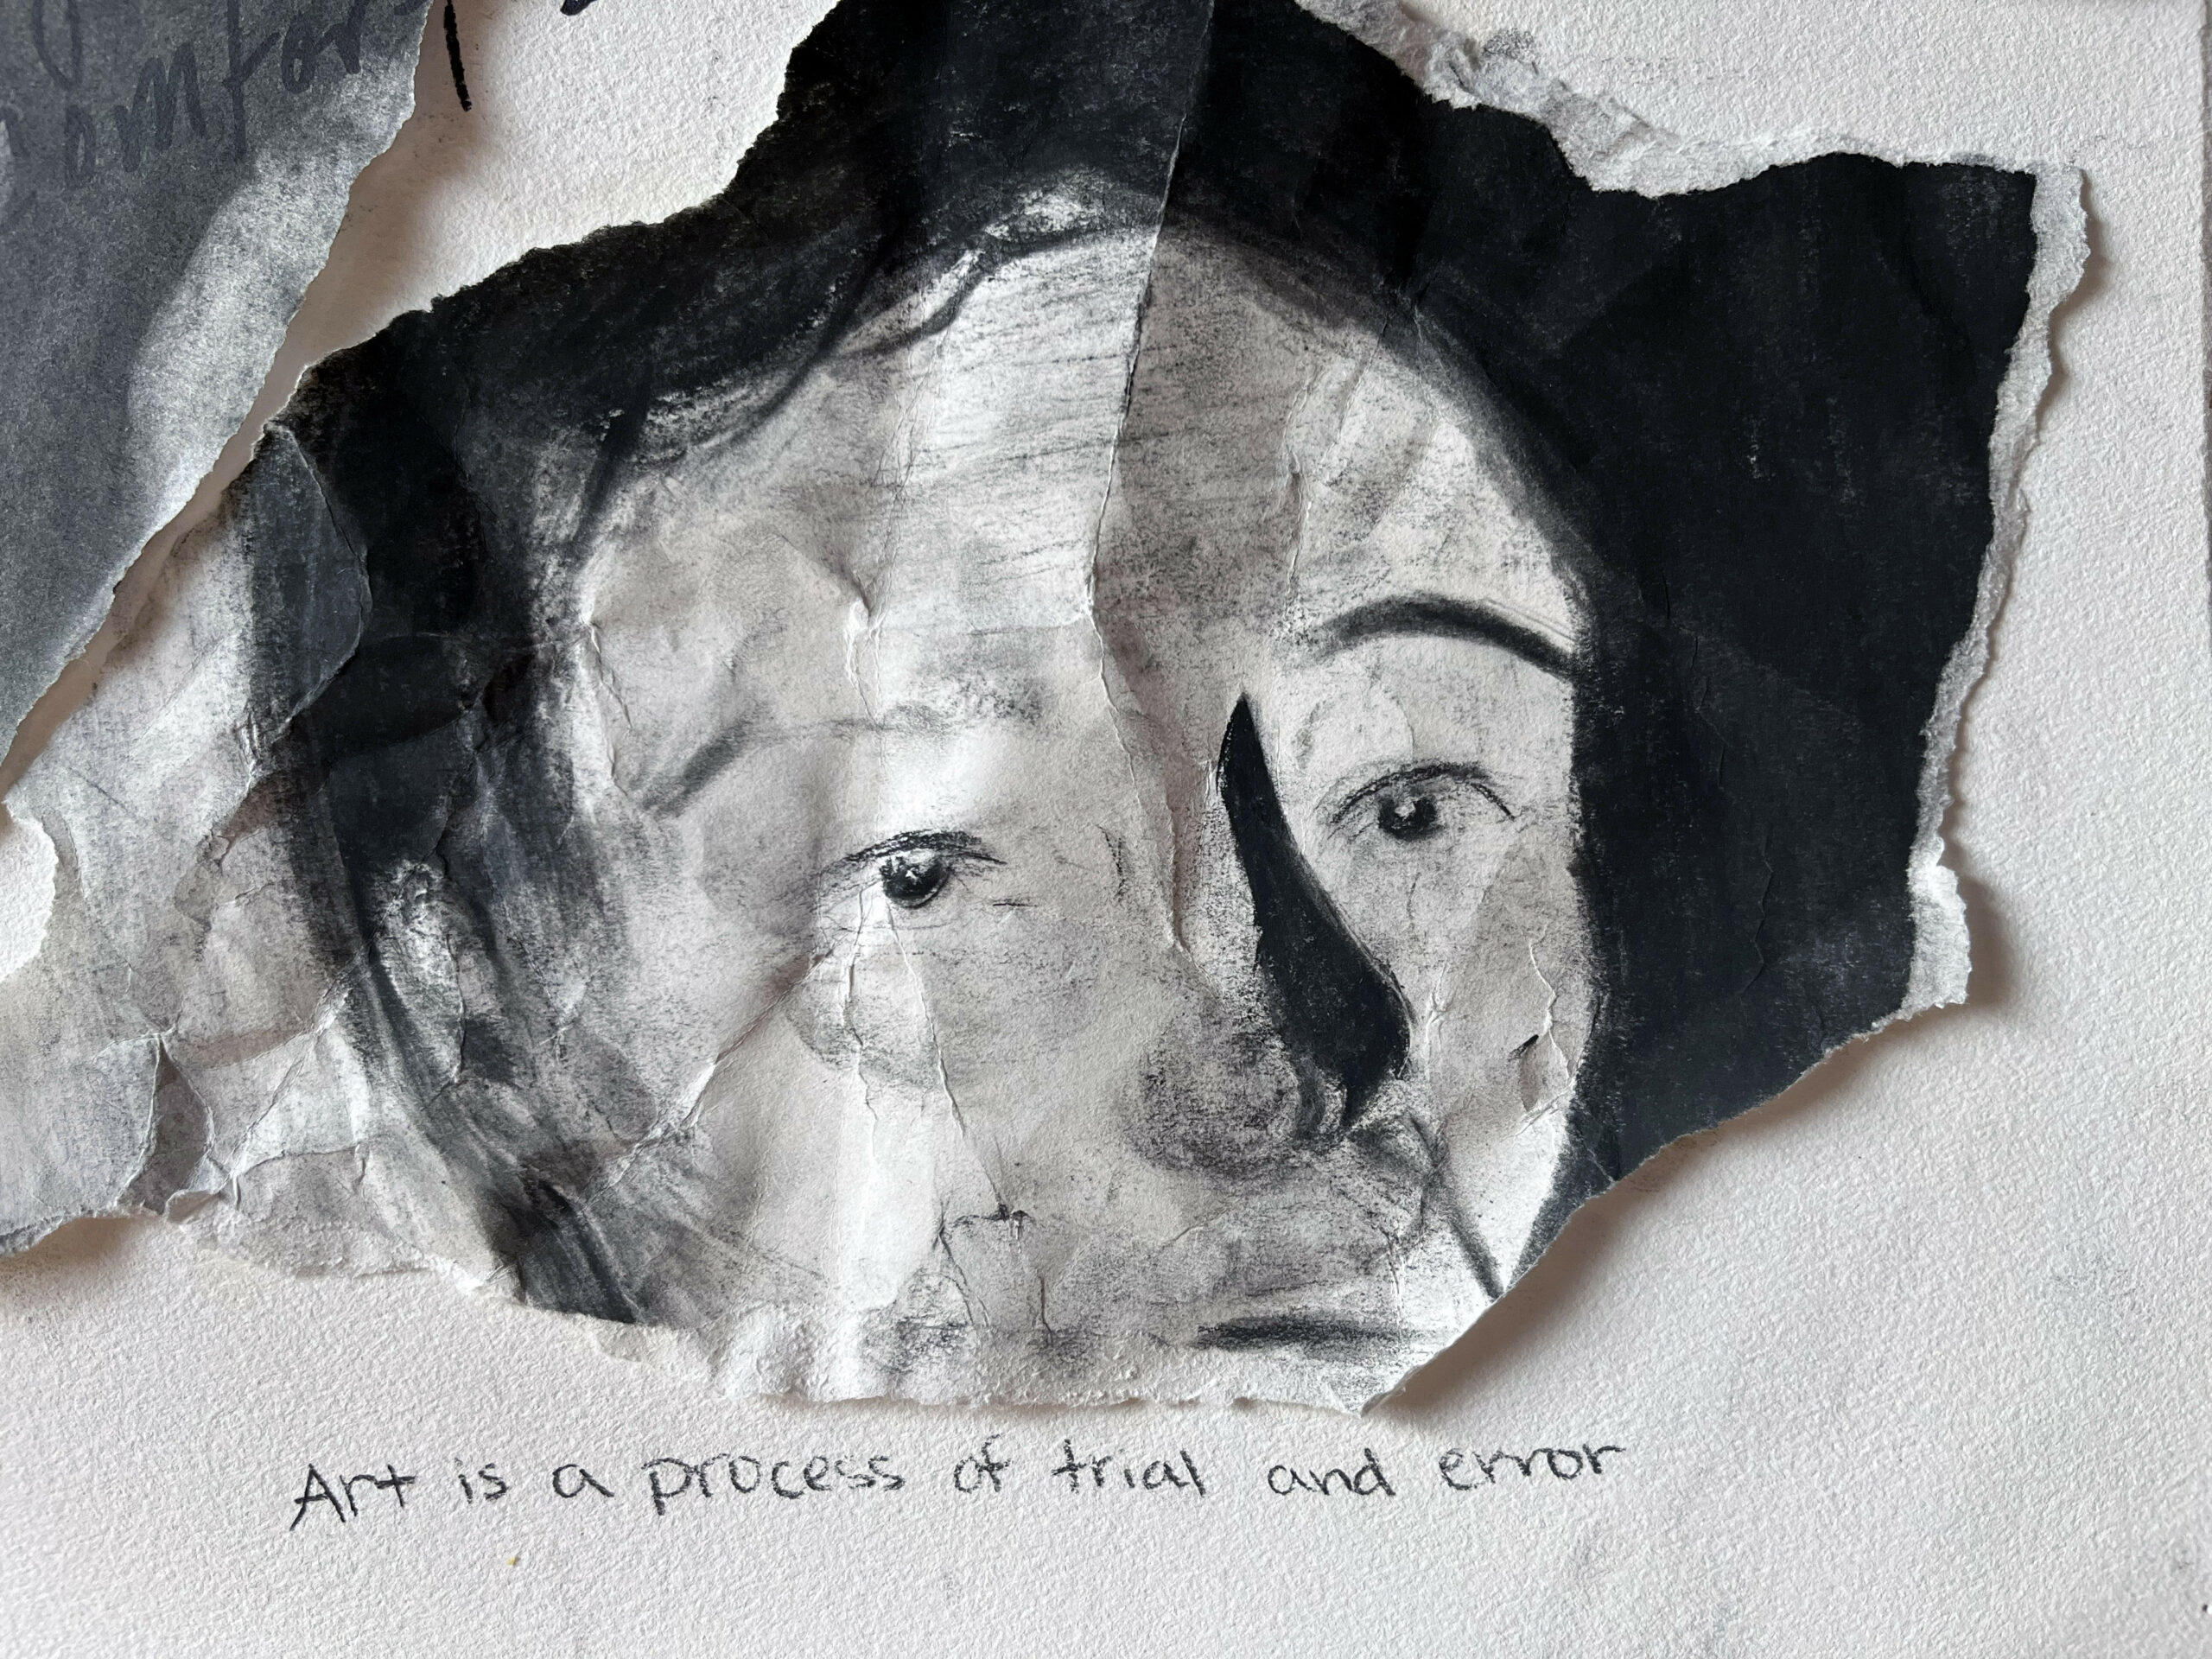 Black and white drawing of a face, torn out and placed on white paper reading: "Art is a process of trial and error."